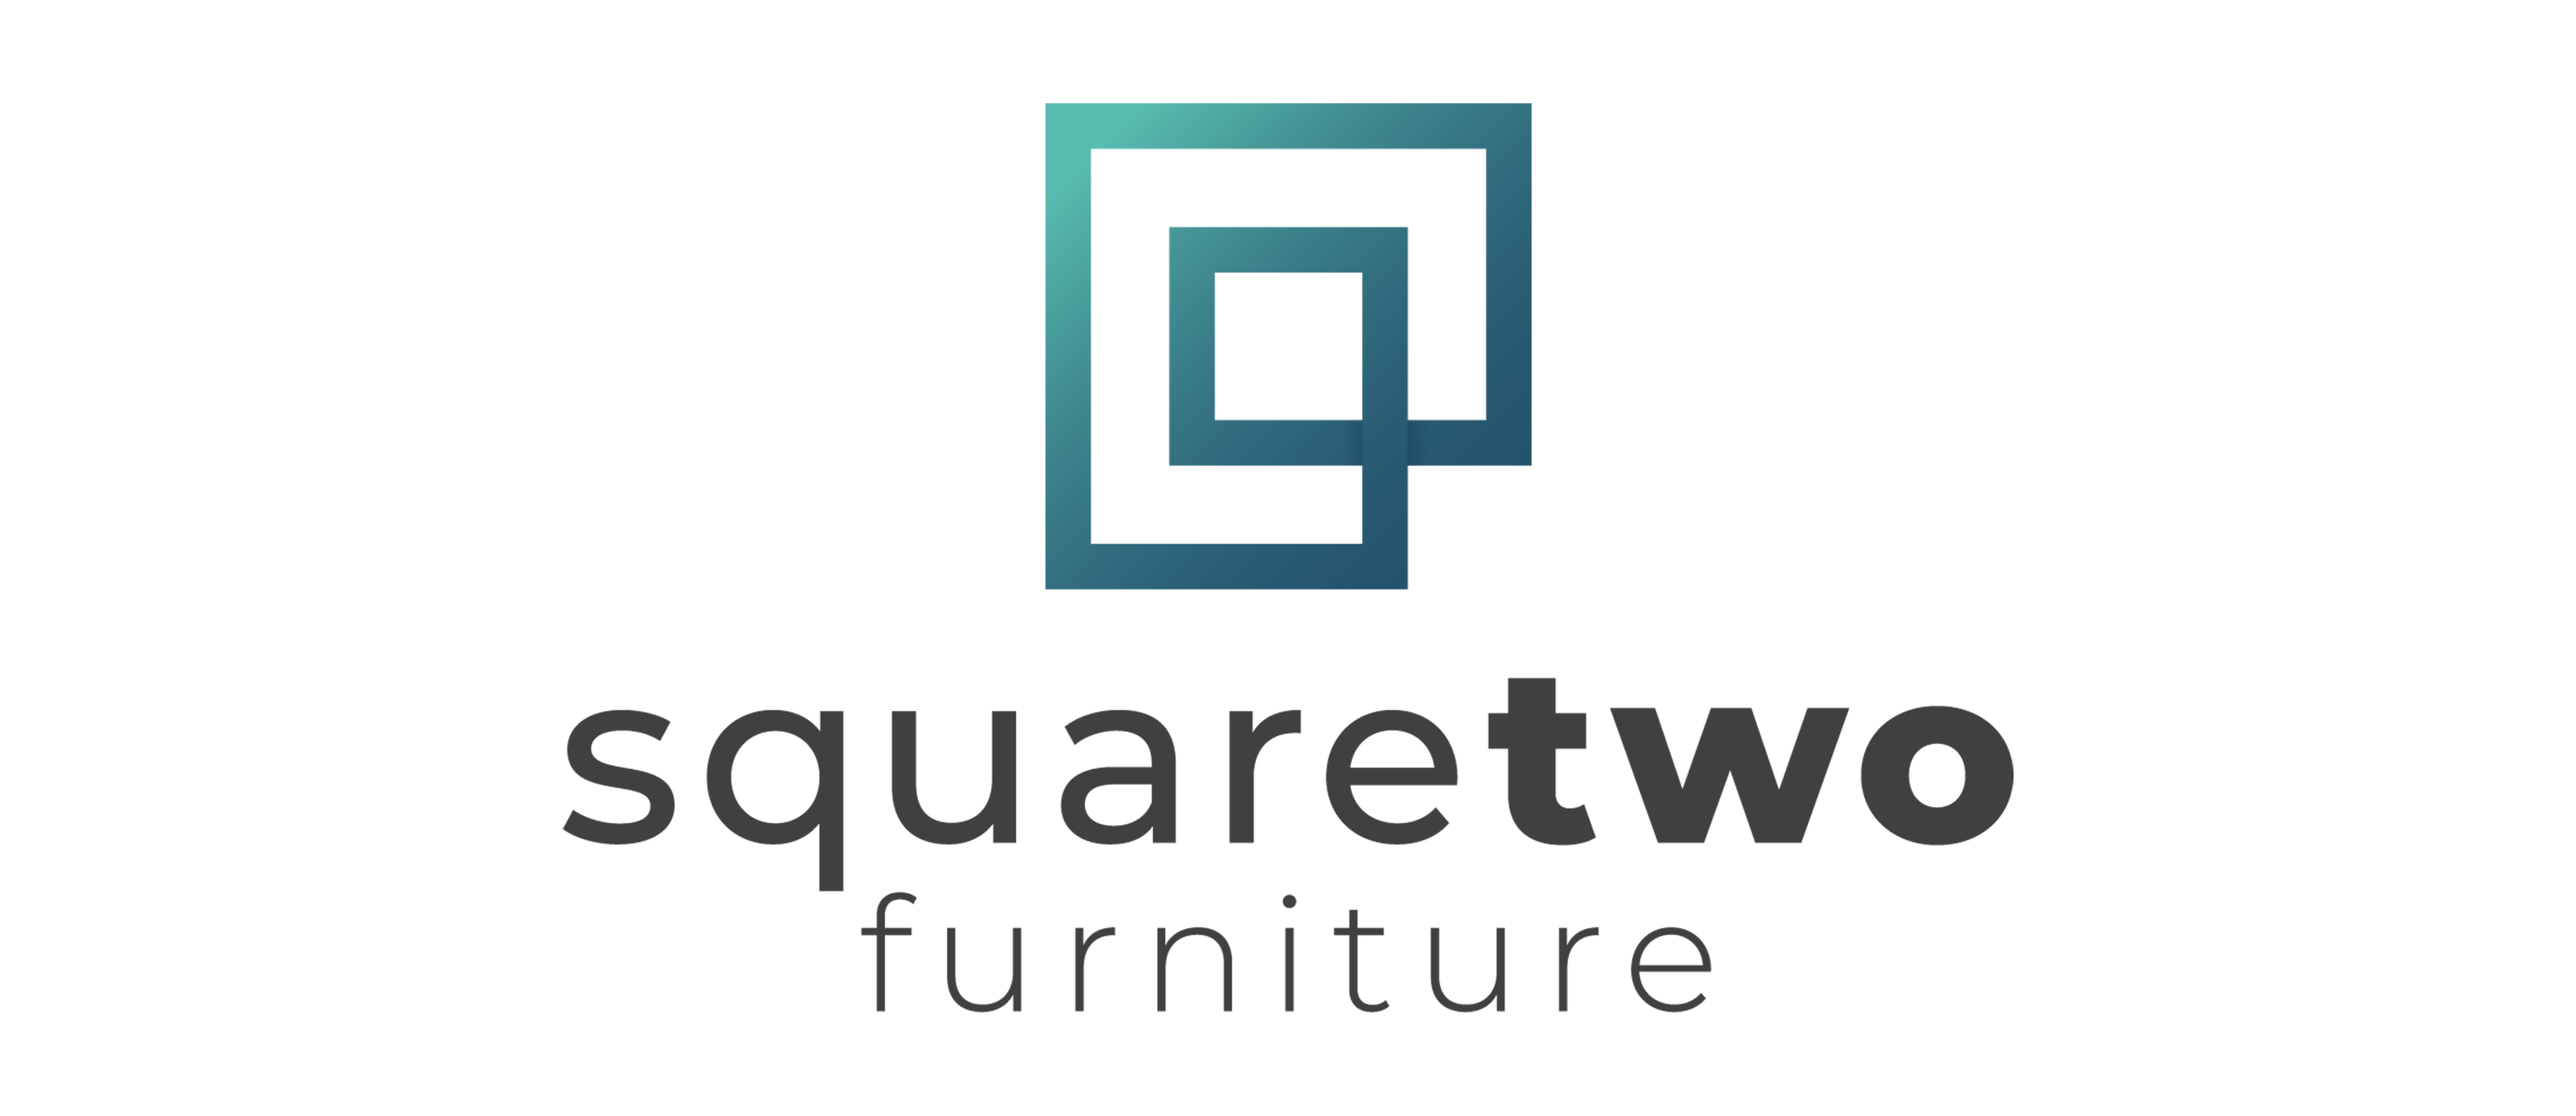 Square Two Furniture logo with two blue concentric square joined together